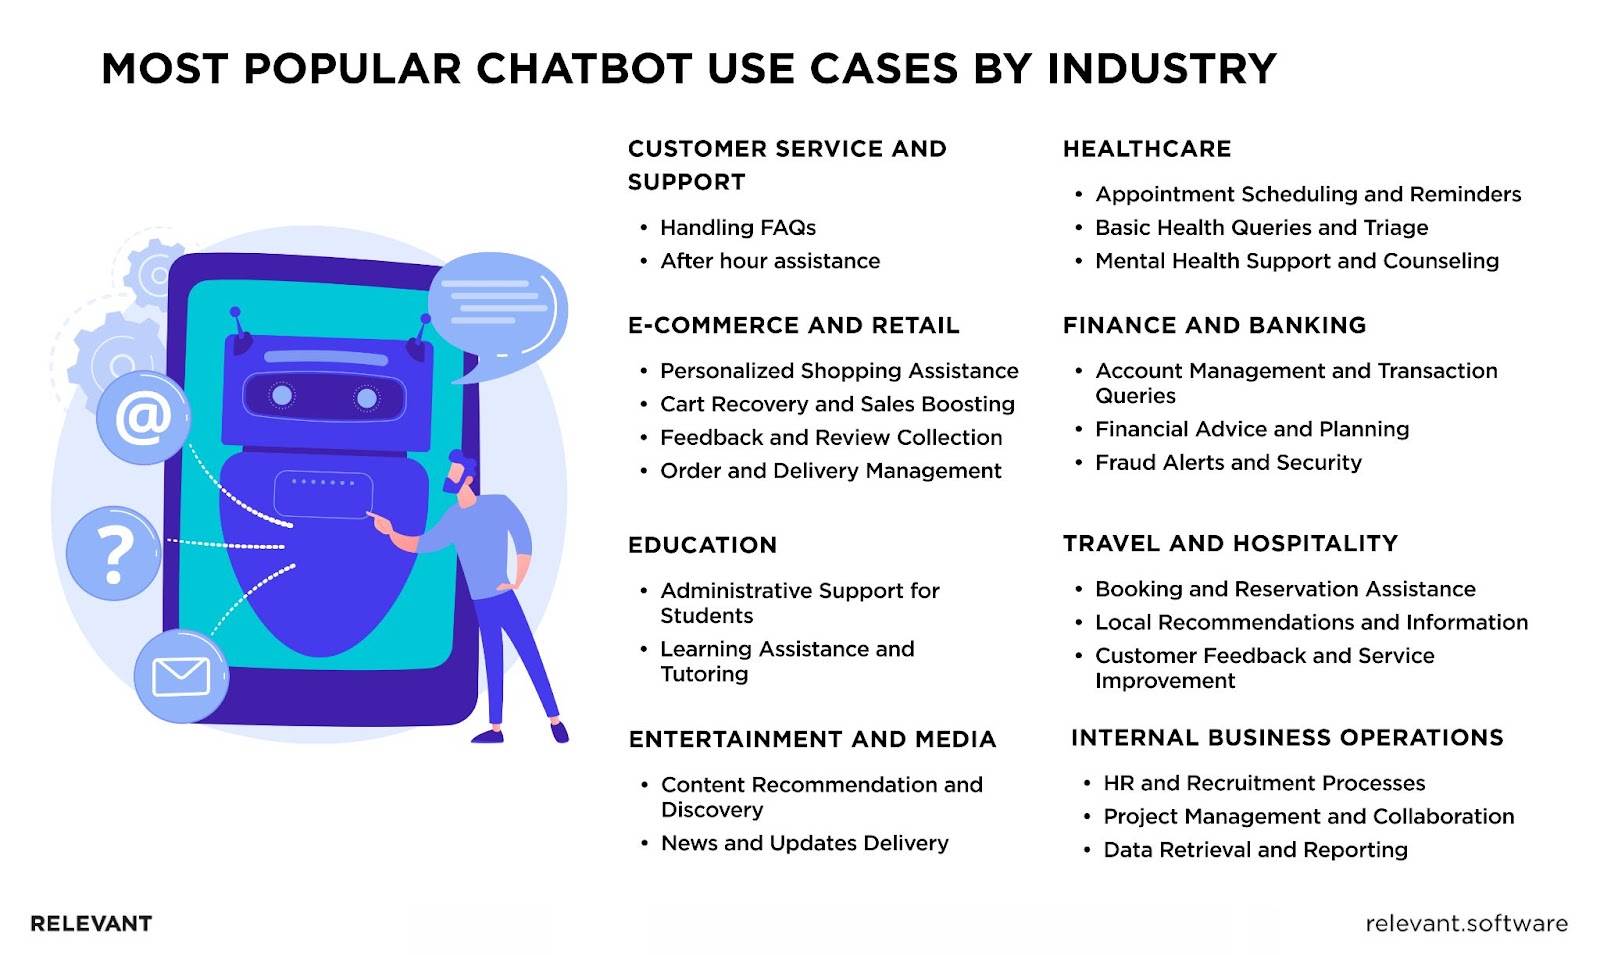 Top Chatbot Use Cases